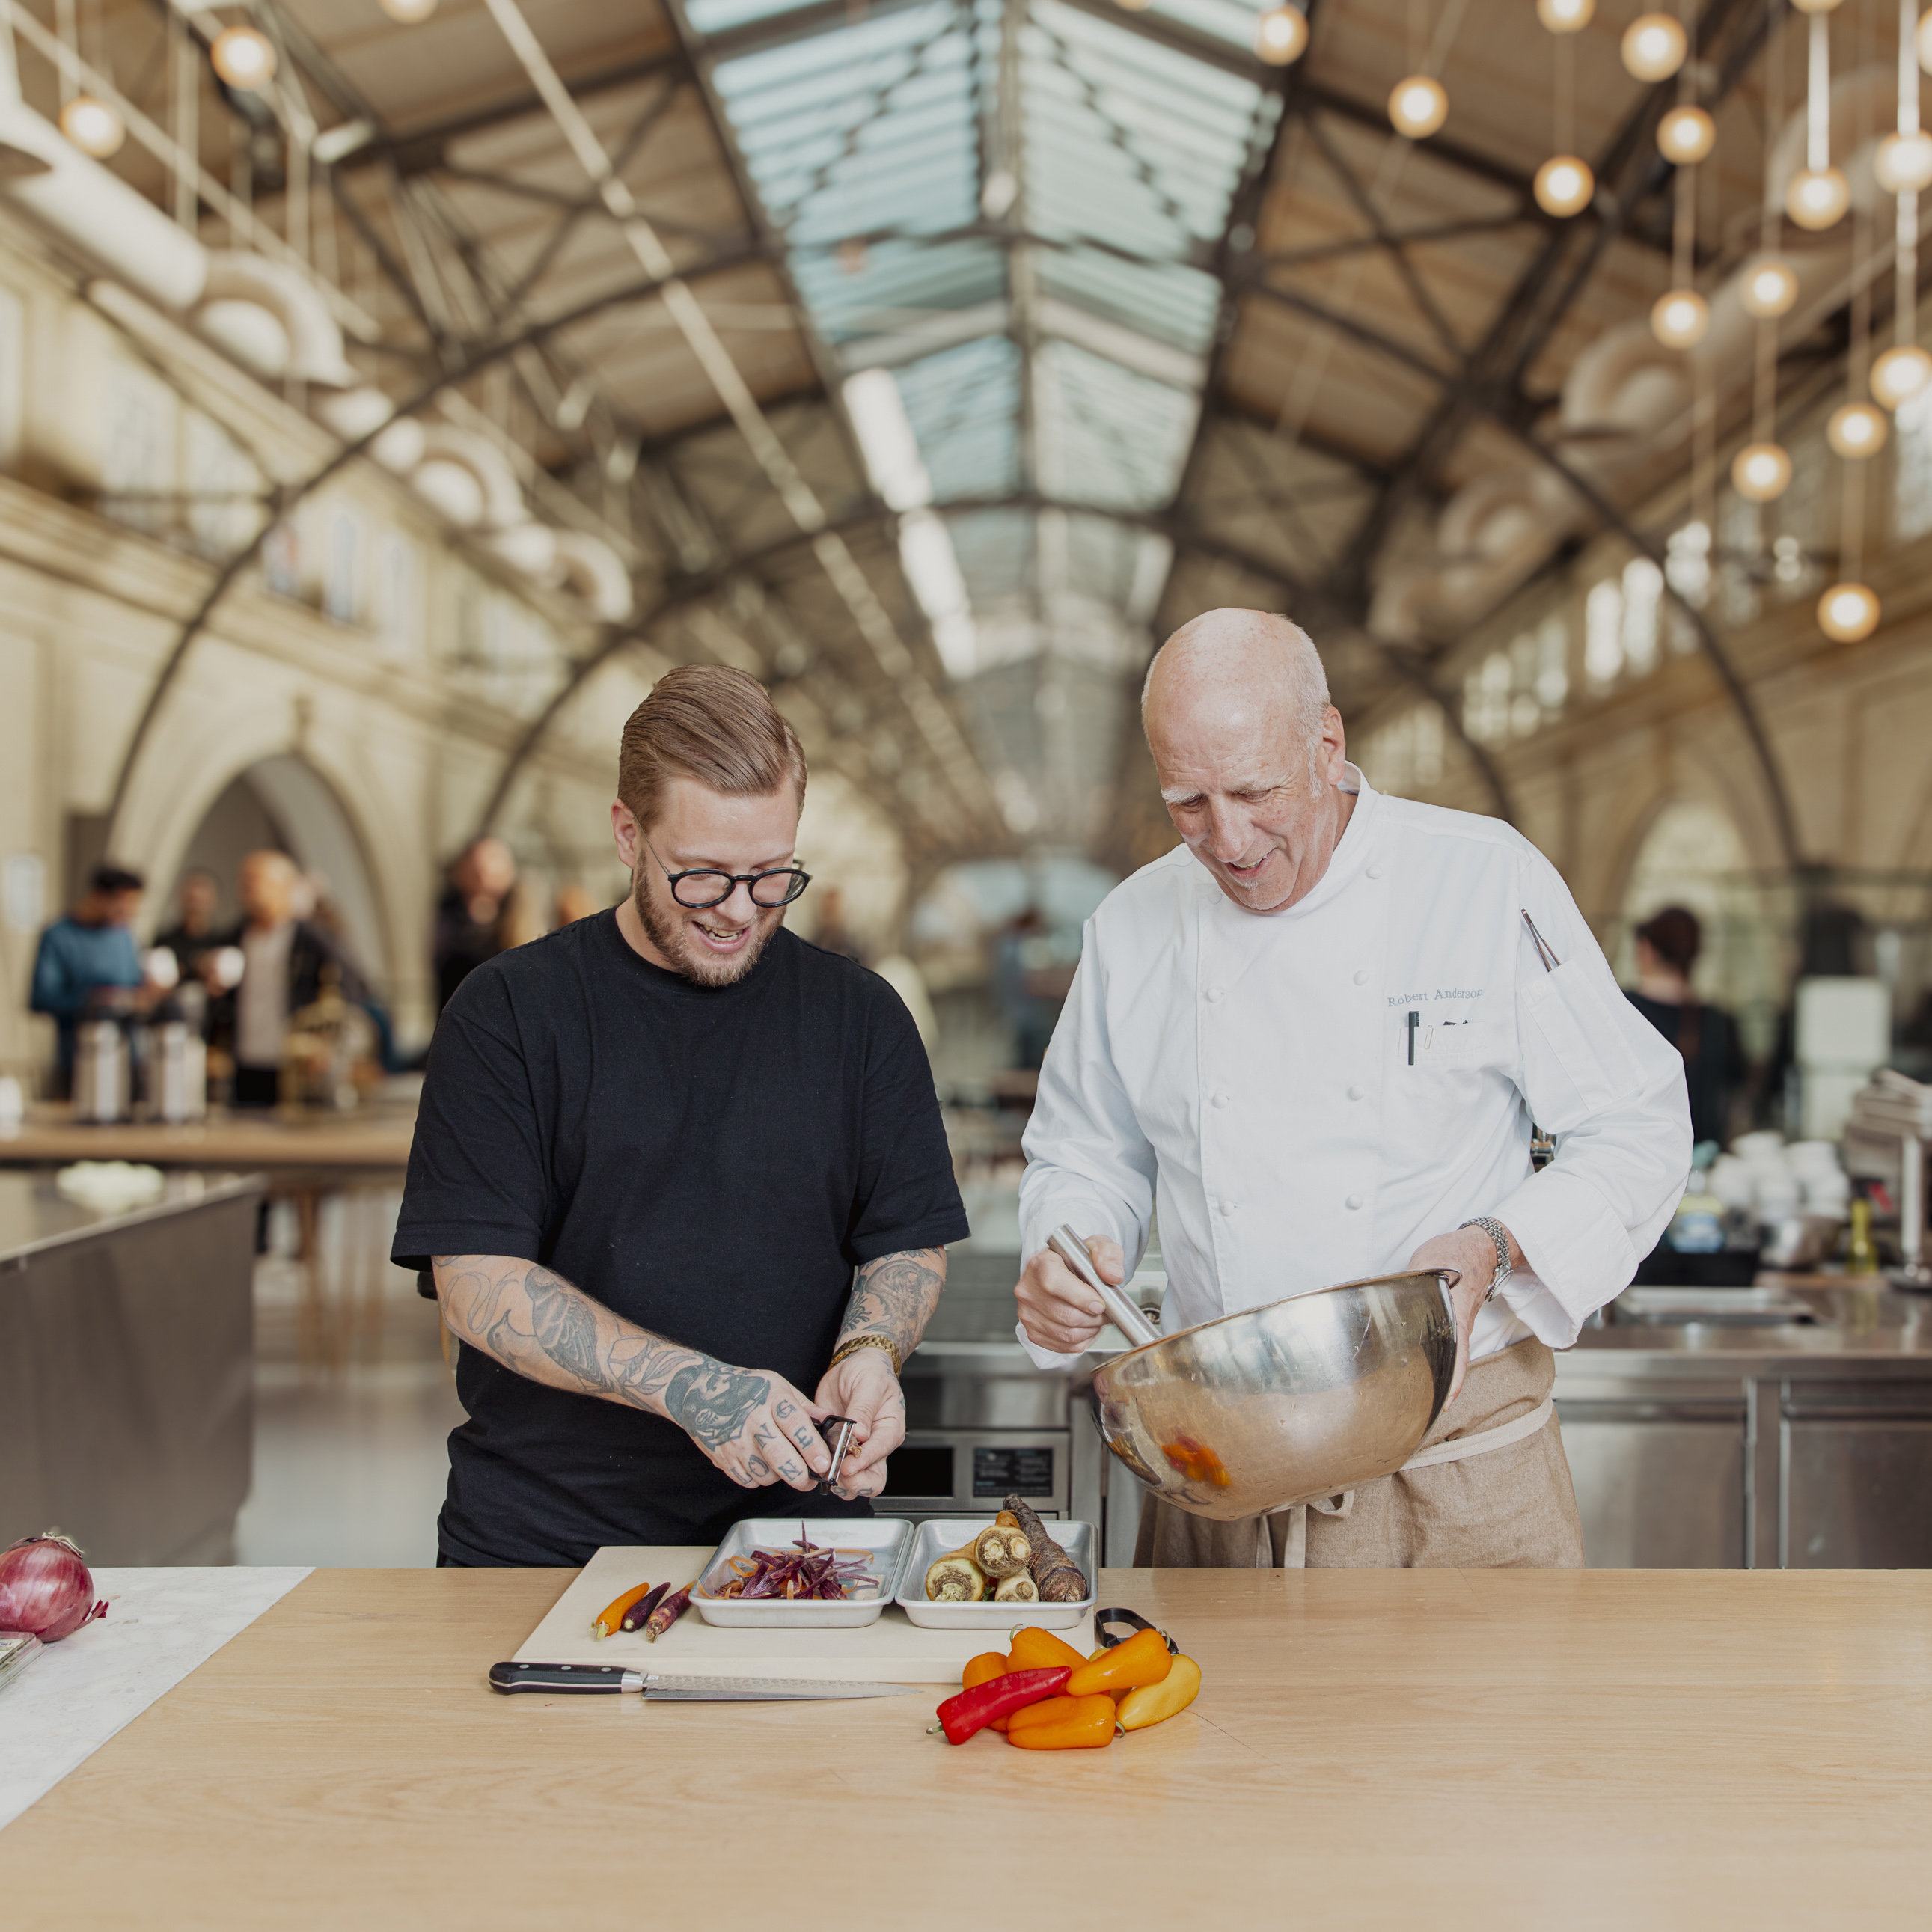 Two chefs, one in black and tattooed, the other in white, cook in a spacious, industrial-style kitchen. They're prepping vegetables and smiling together.